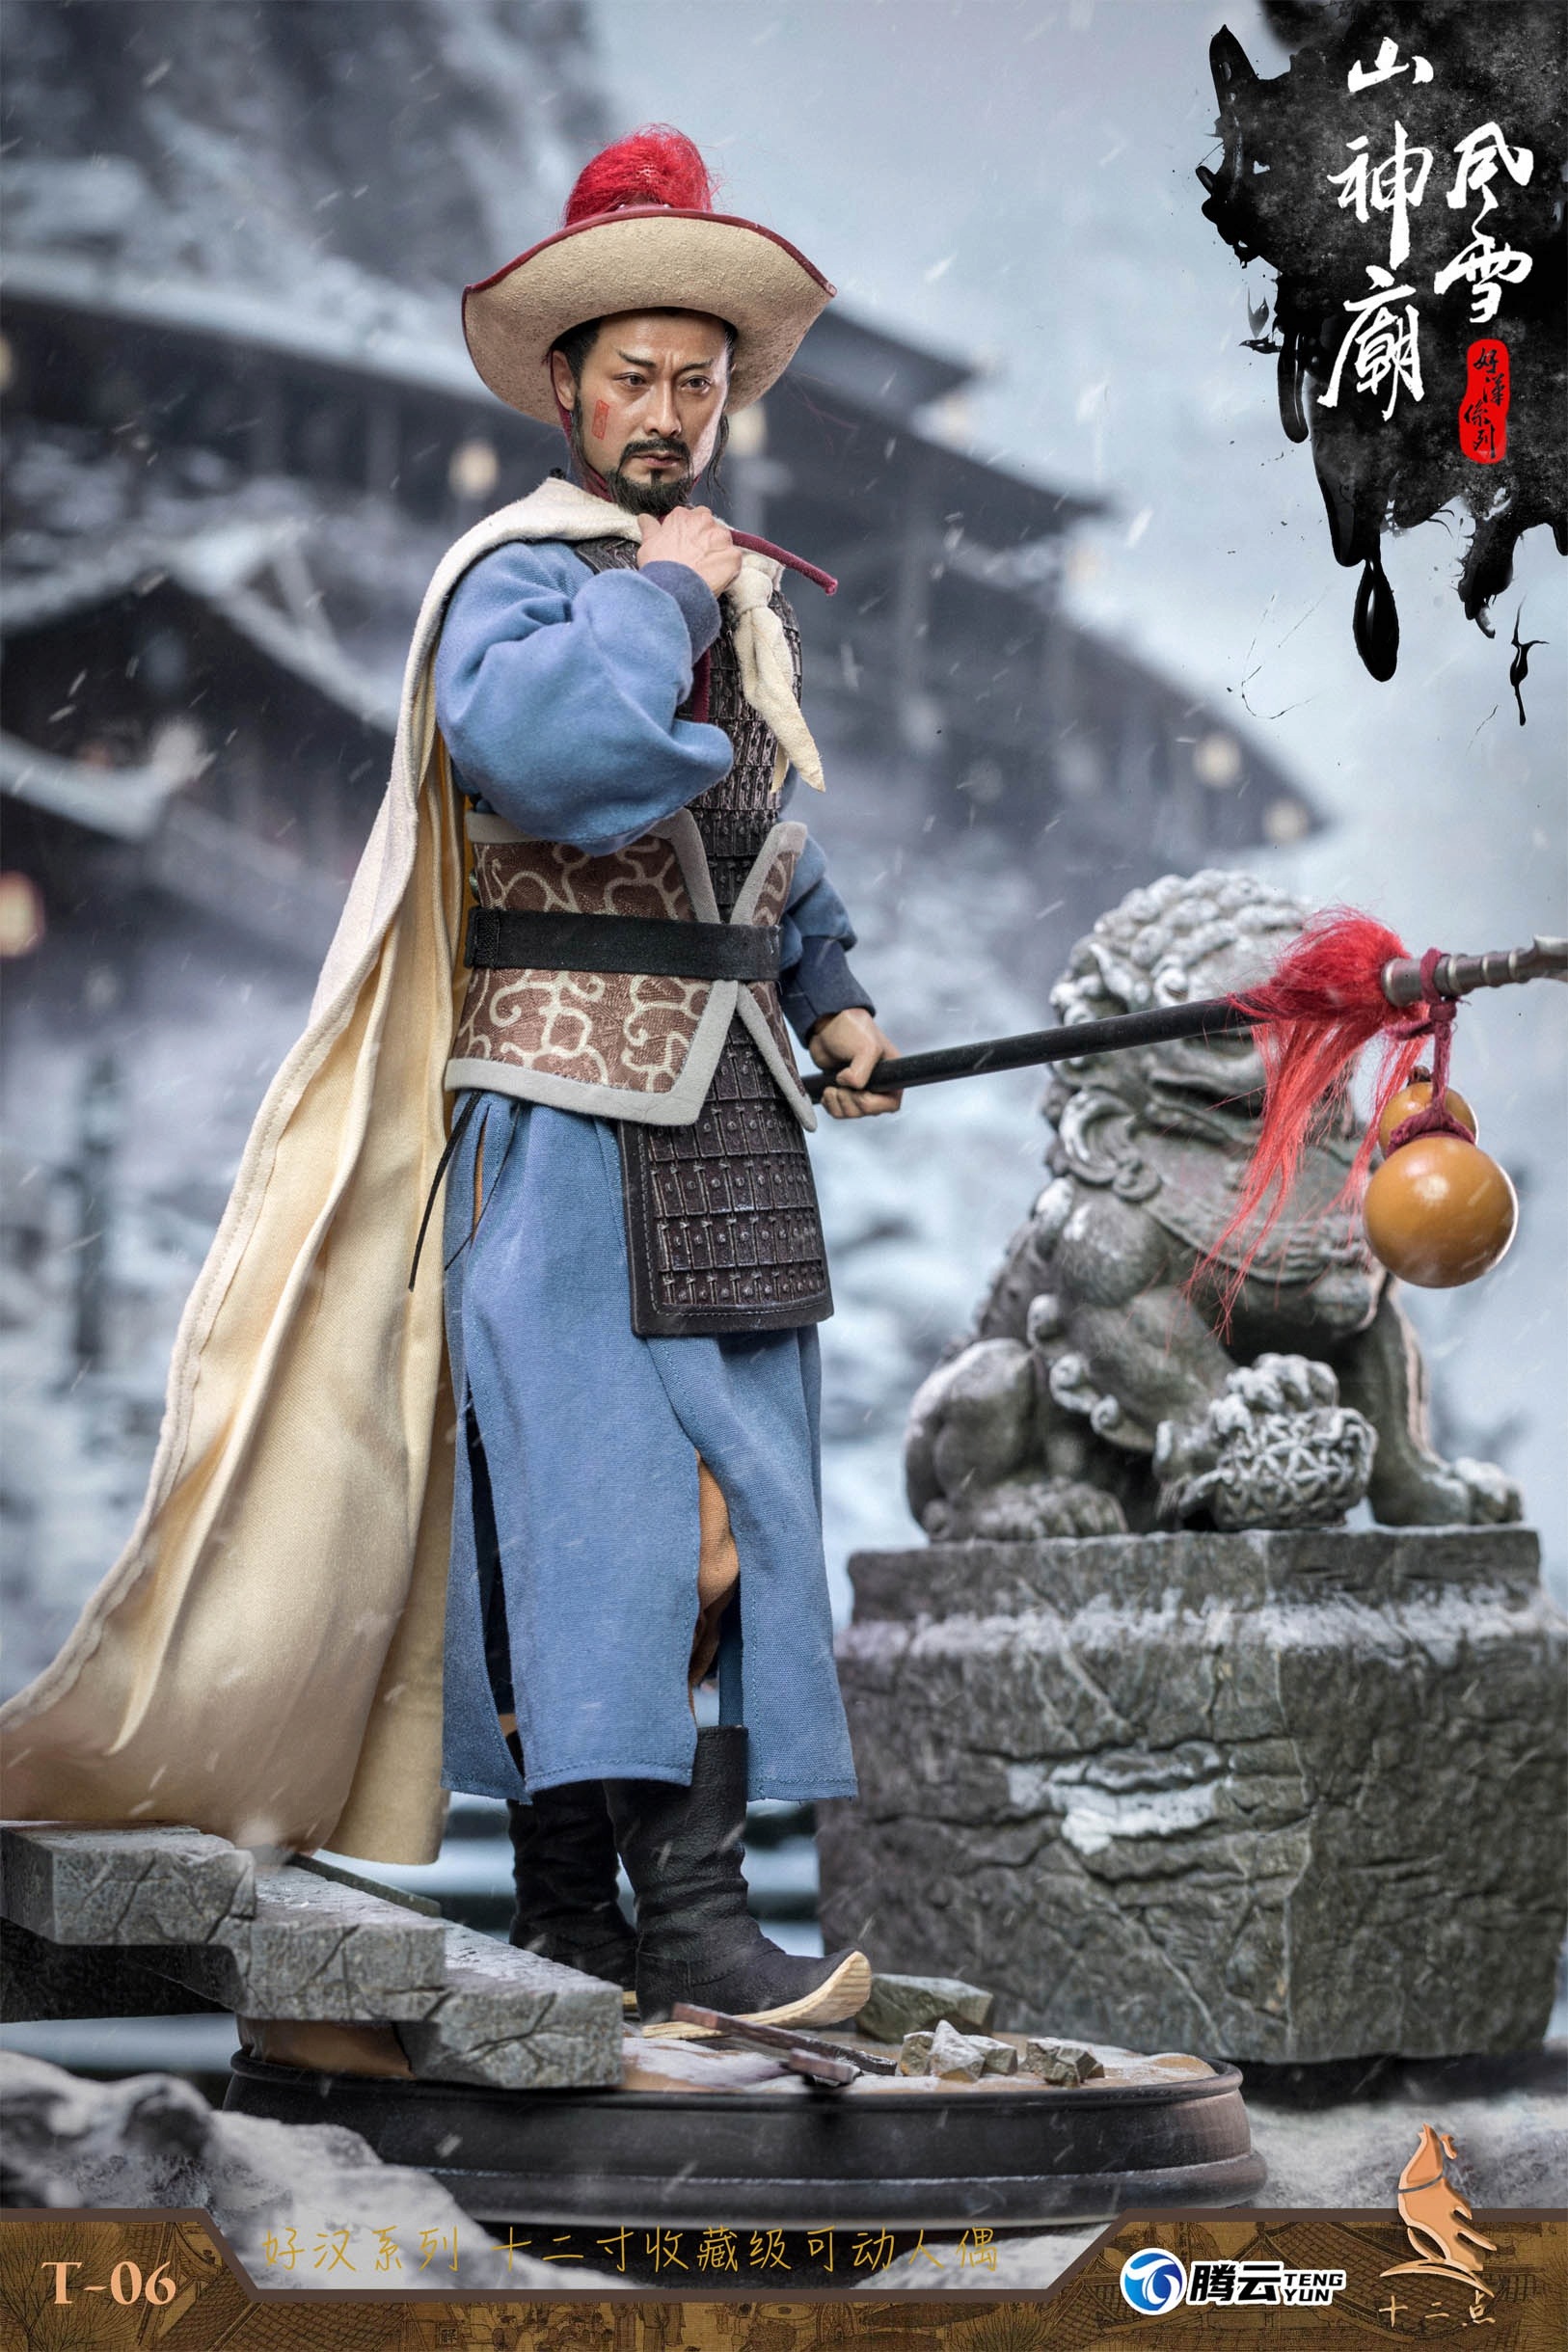 NEW PRODUCT: Twelve - Hero Series - Leopard Head Lin Chong Fengxue Mountain Temple Action Figure (T-05 /T-06) 2140